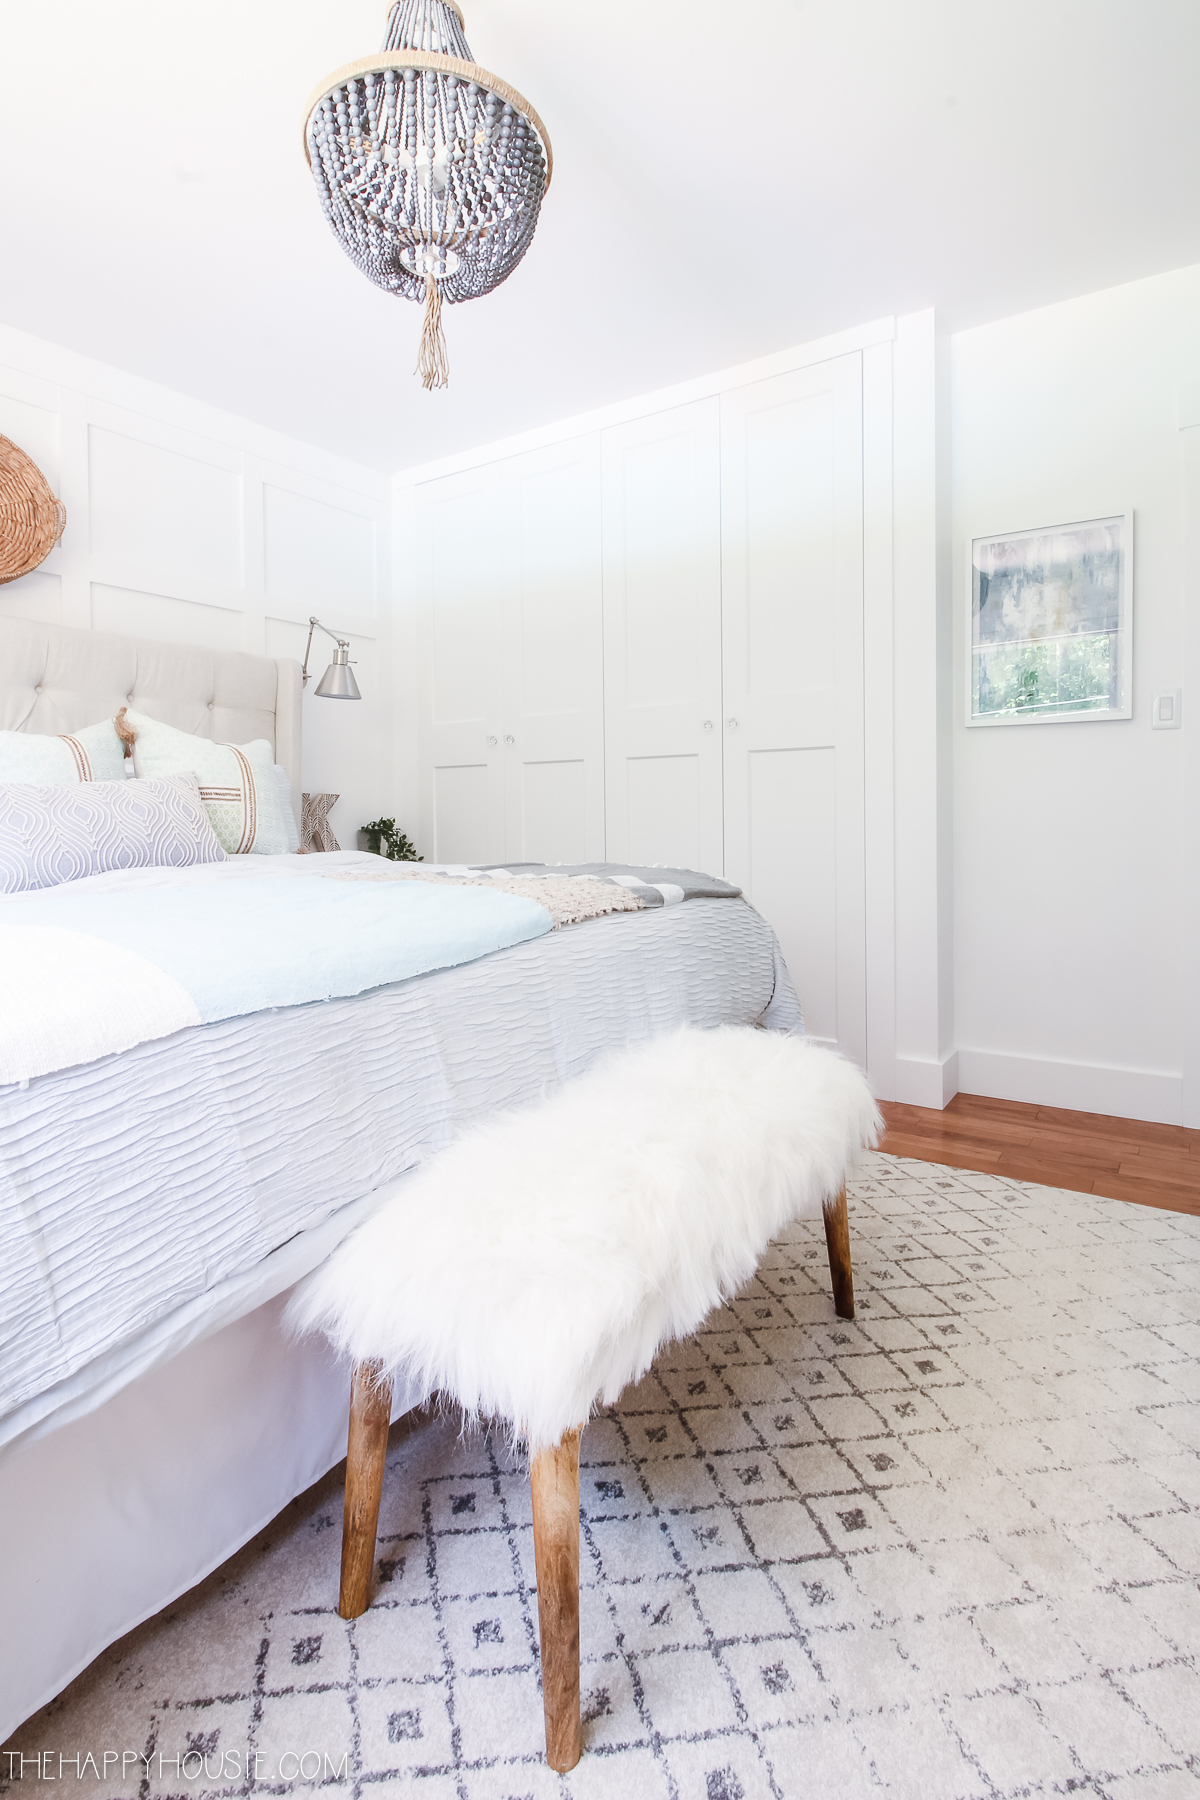 A white faux fur throw is on a bench in the bedroom.